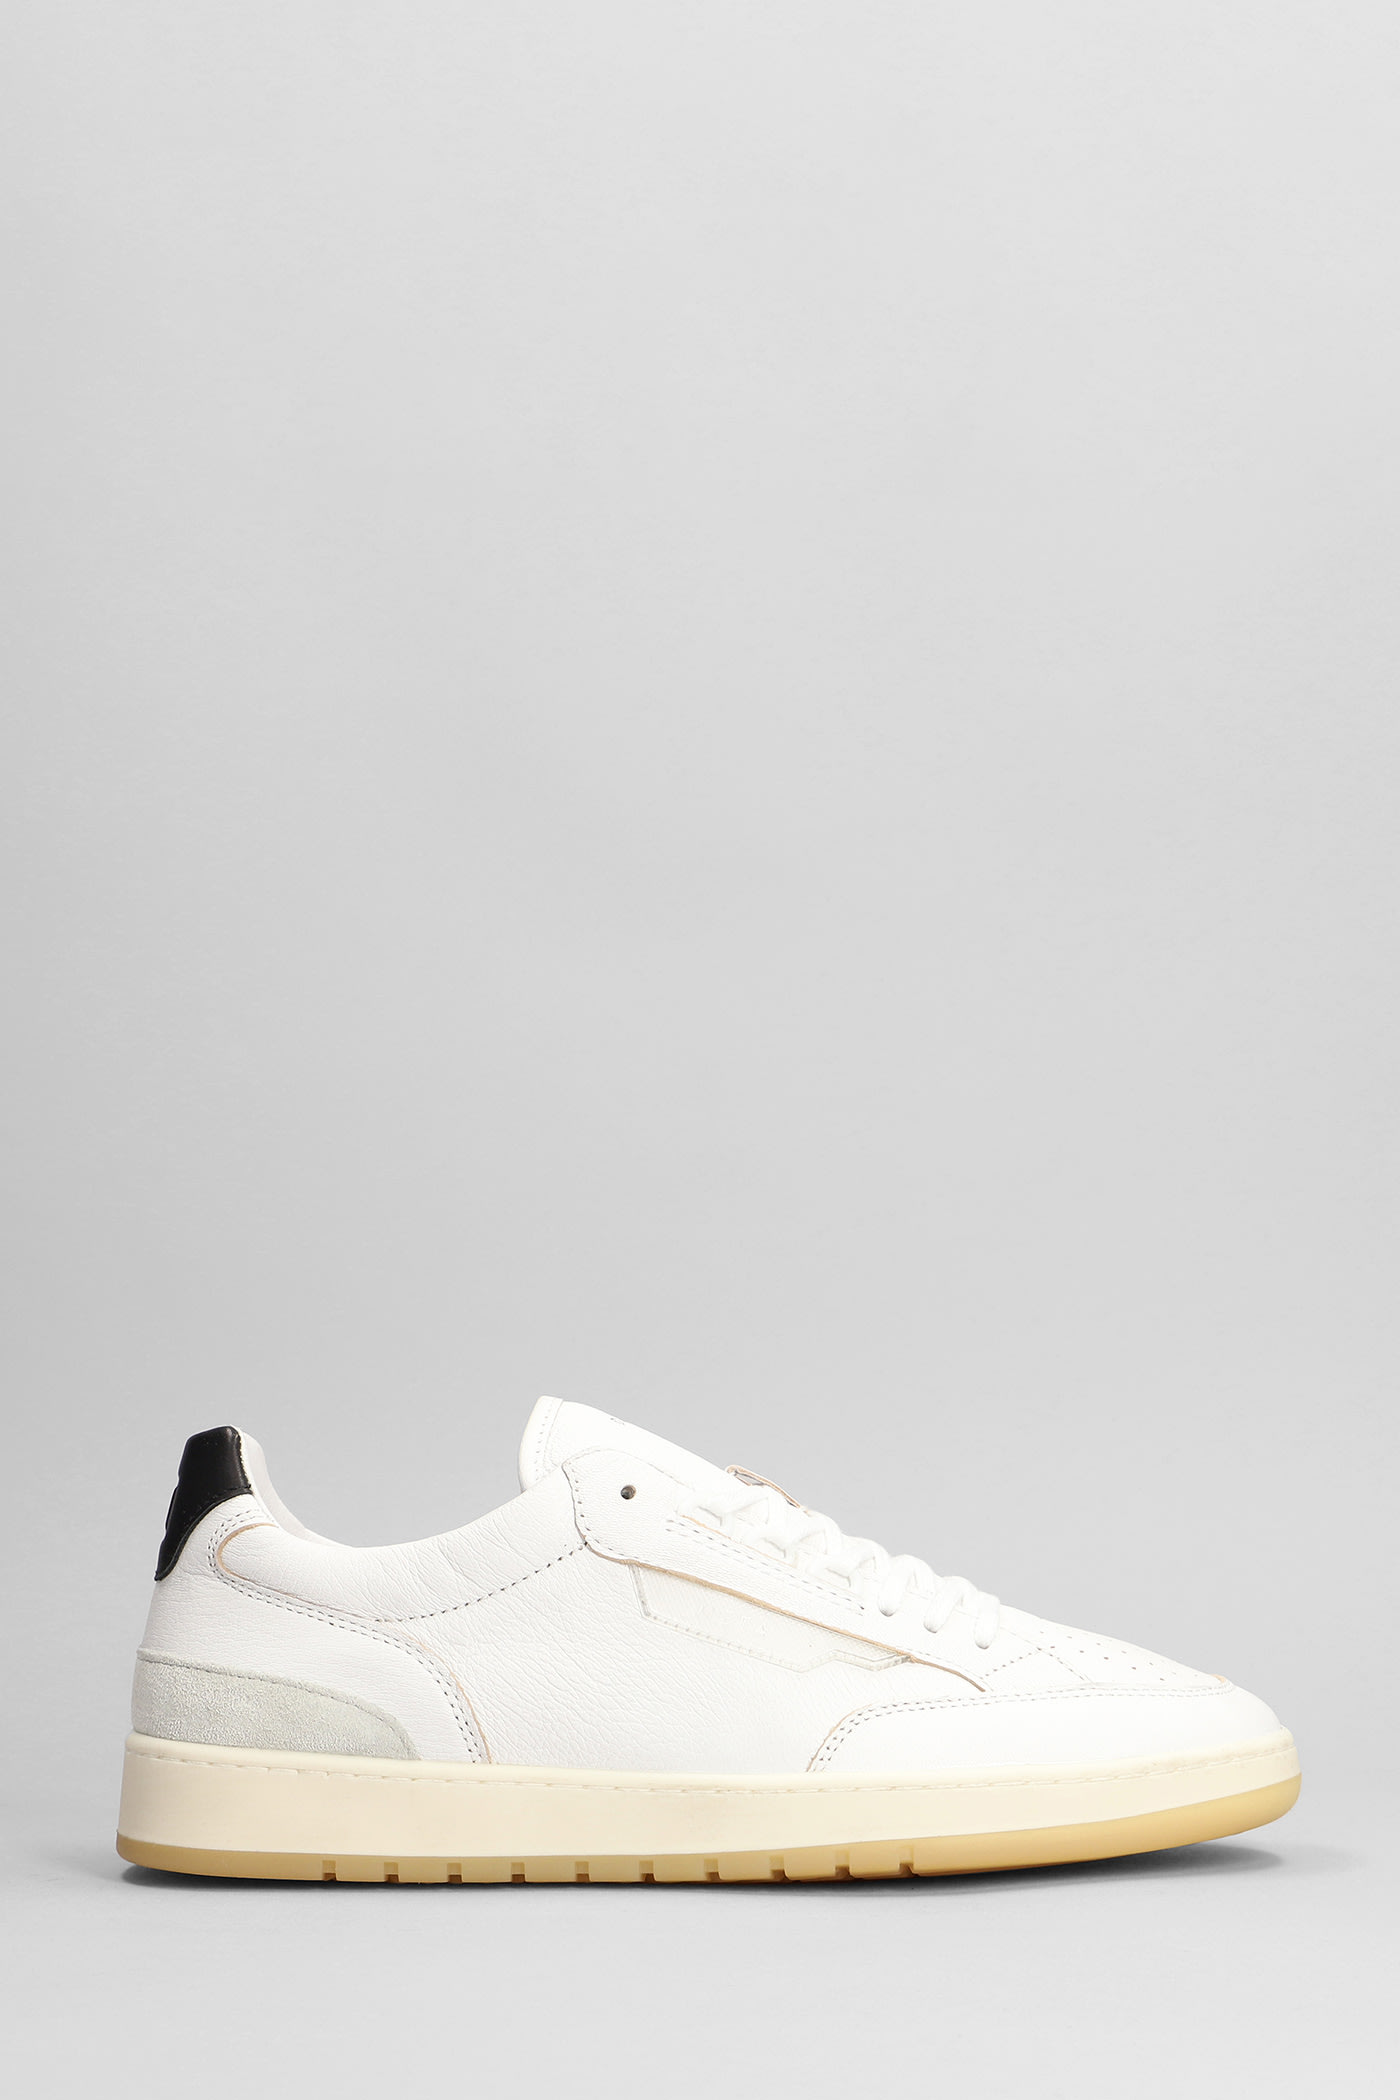 D.A.T.E. Meta Sneakers In White Leather